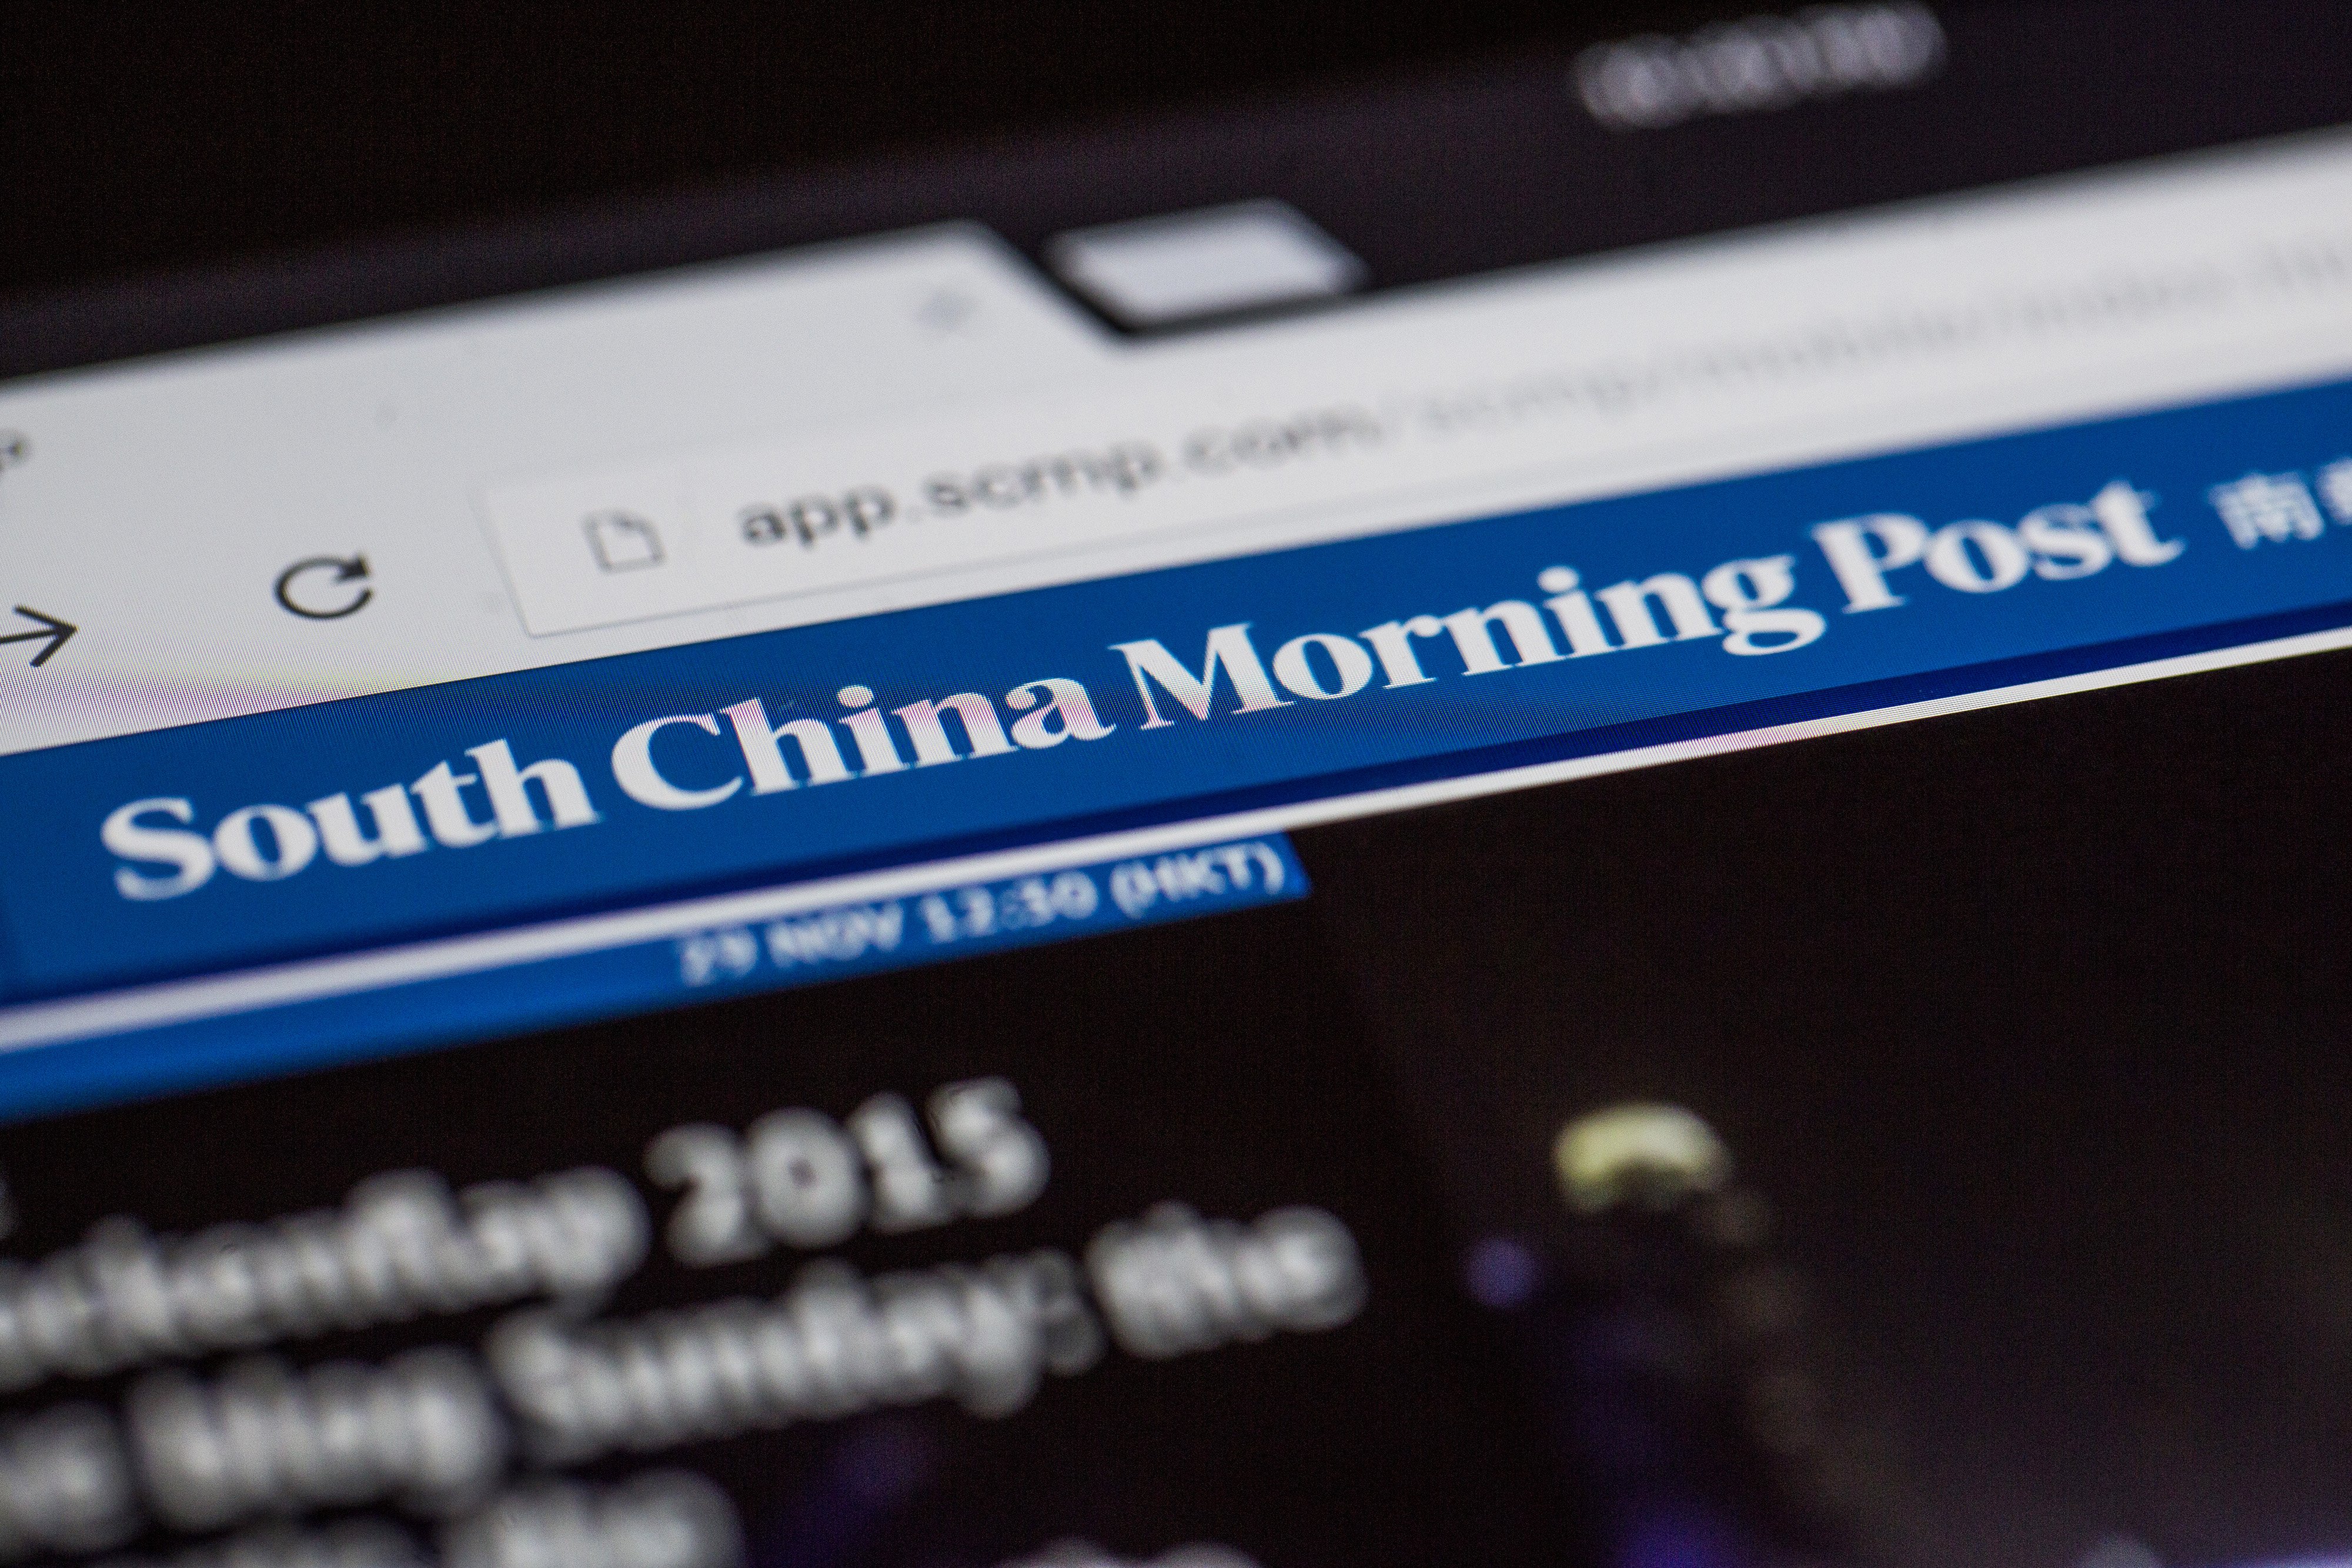 The South China Morning Post (SCMP) app is arranged for a photograph on a tablet in Hong Kong, China, on Sunday, Nov. 29, 2015. Alibaba Group Holding Ltd.'s founder Jack Ma is in talks to buy a stake in the publisher of Hong Kong's South China Morning Post, according to people familiar with the matter, in what could make him the latest Internet-industry tycoon to pursue the revival of a traditional newspaper. Photographer: Justin Chin/Bloomberg ORG XMIT: 594105521